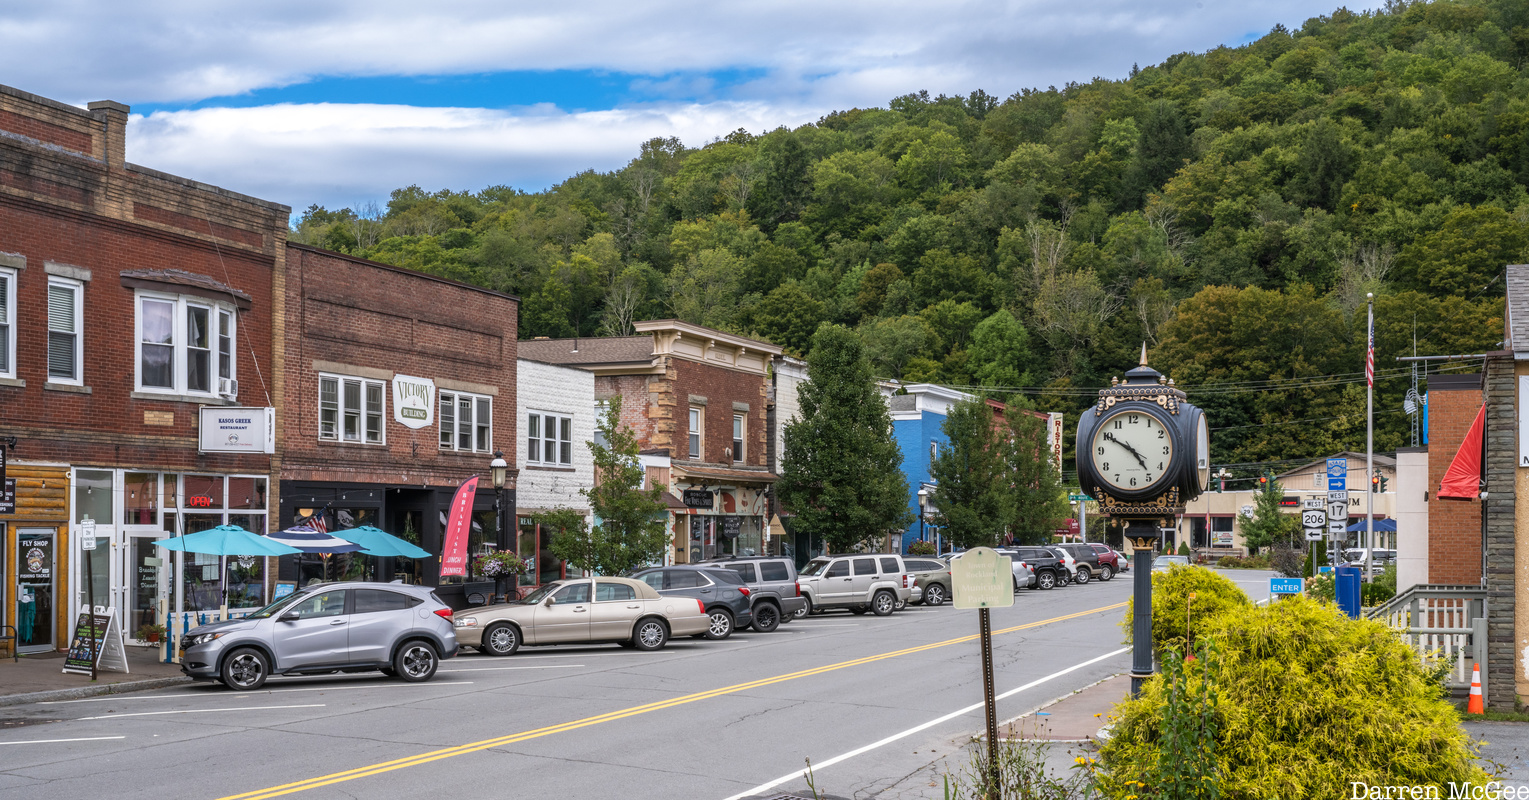 Catskill NY - A Town With Opportunity